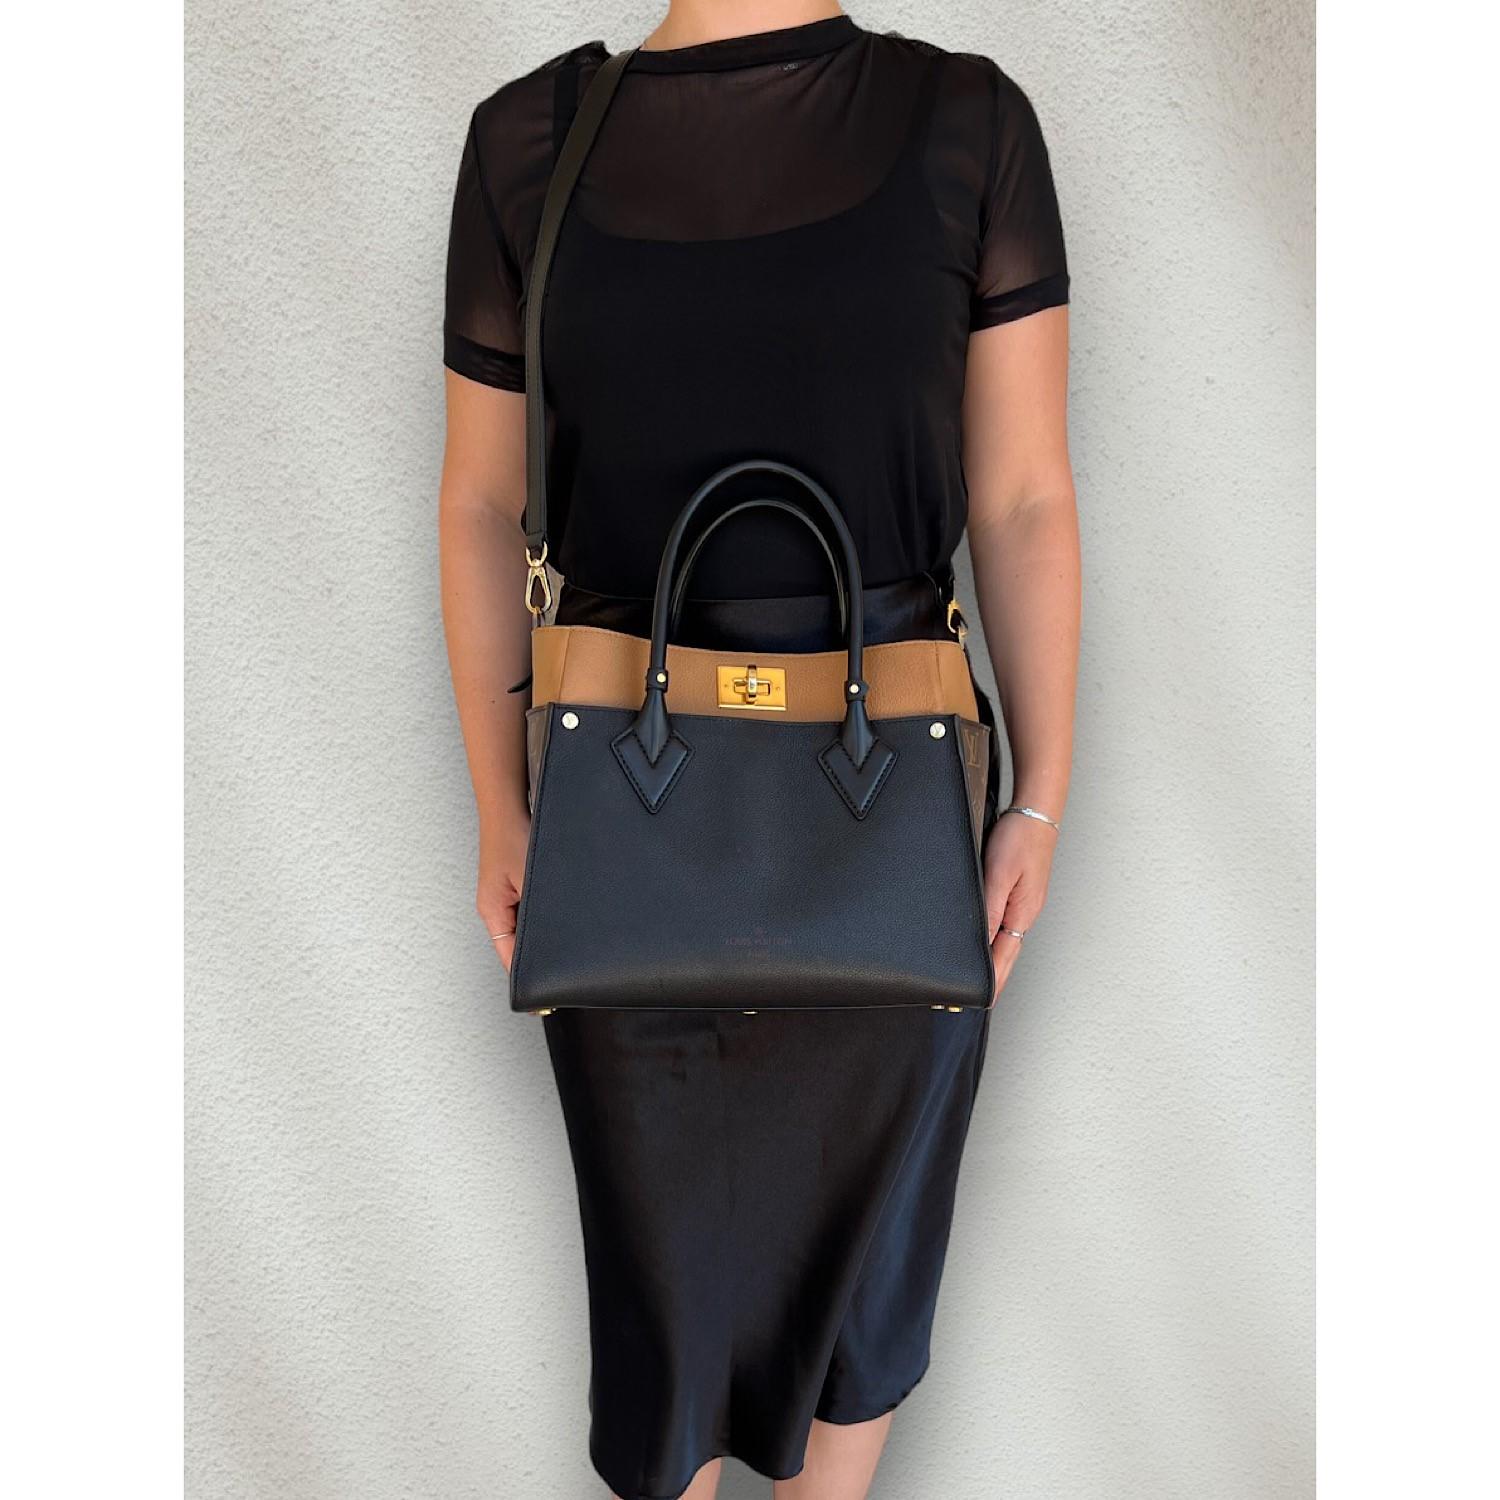 The On My Side MM tote bag is fashioned from an elegant combination of small-grained calf leather and emblematic Monogram canvas. The large outside pockets in contrasting canvas create a bag-in-a-bag look. The roomy interior can easily hold